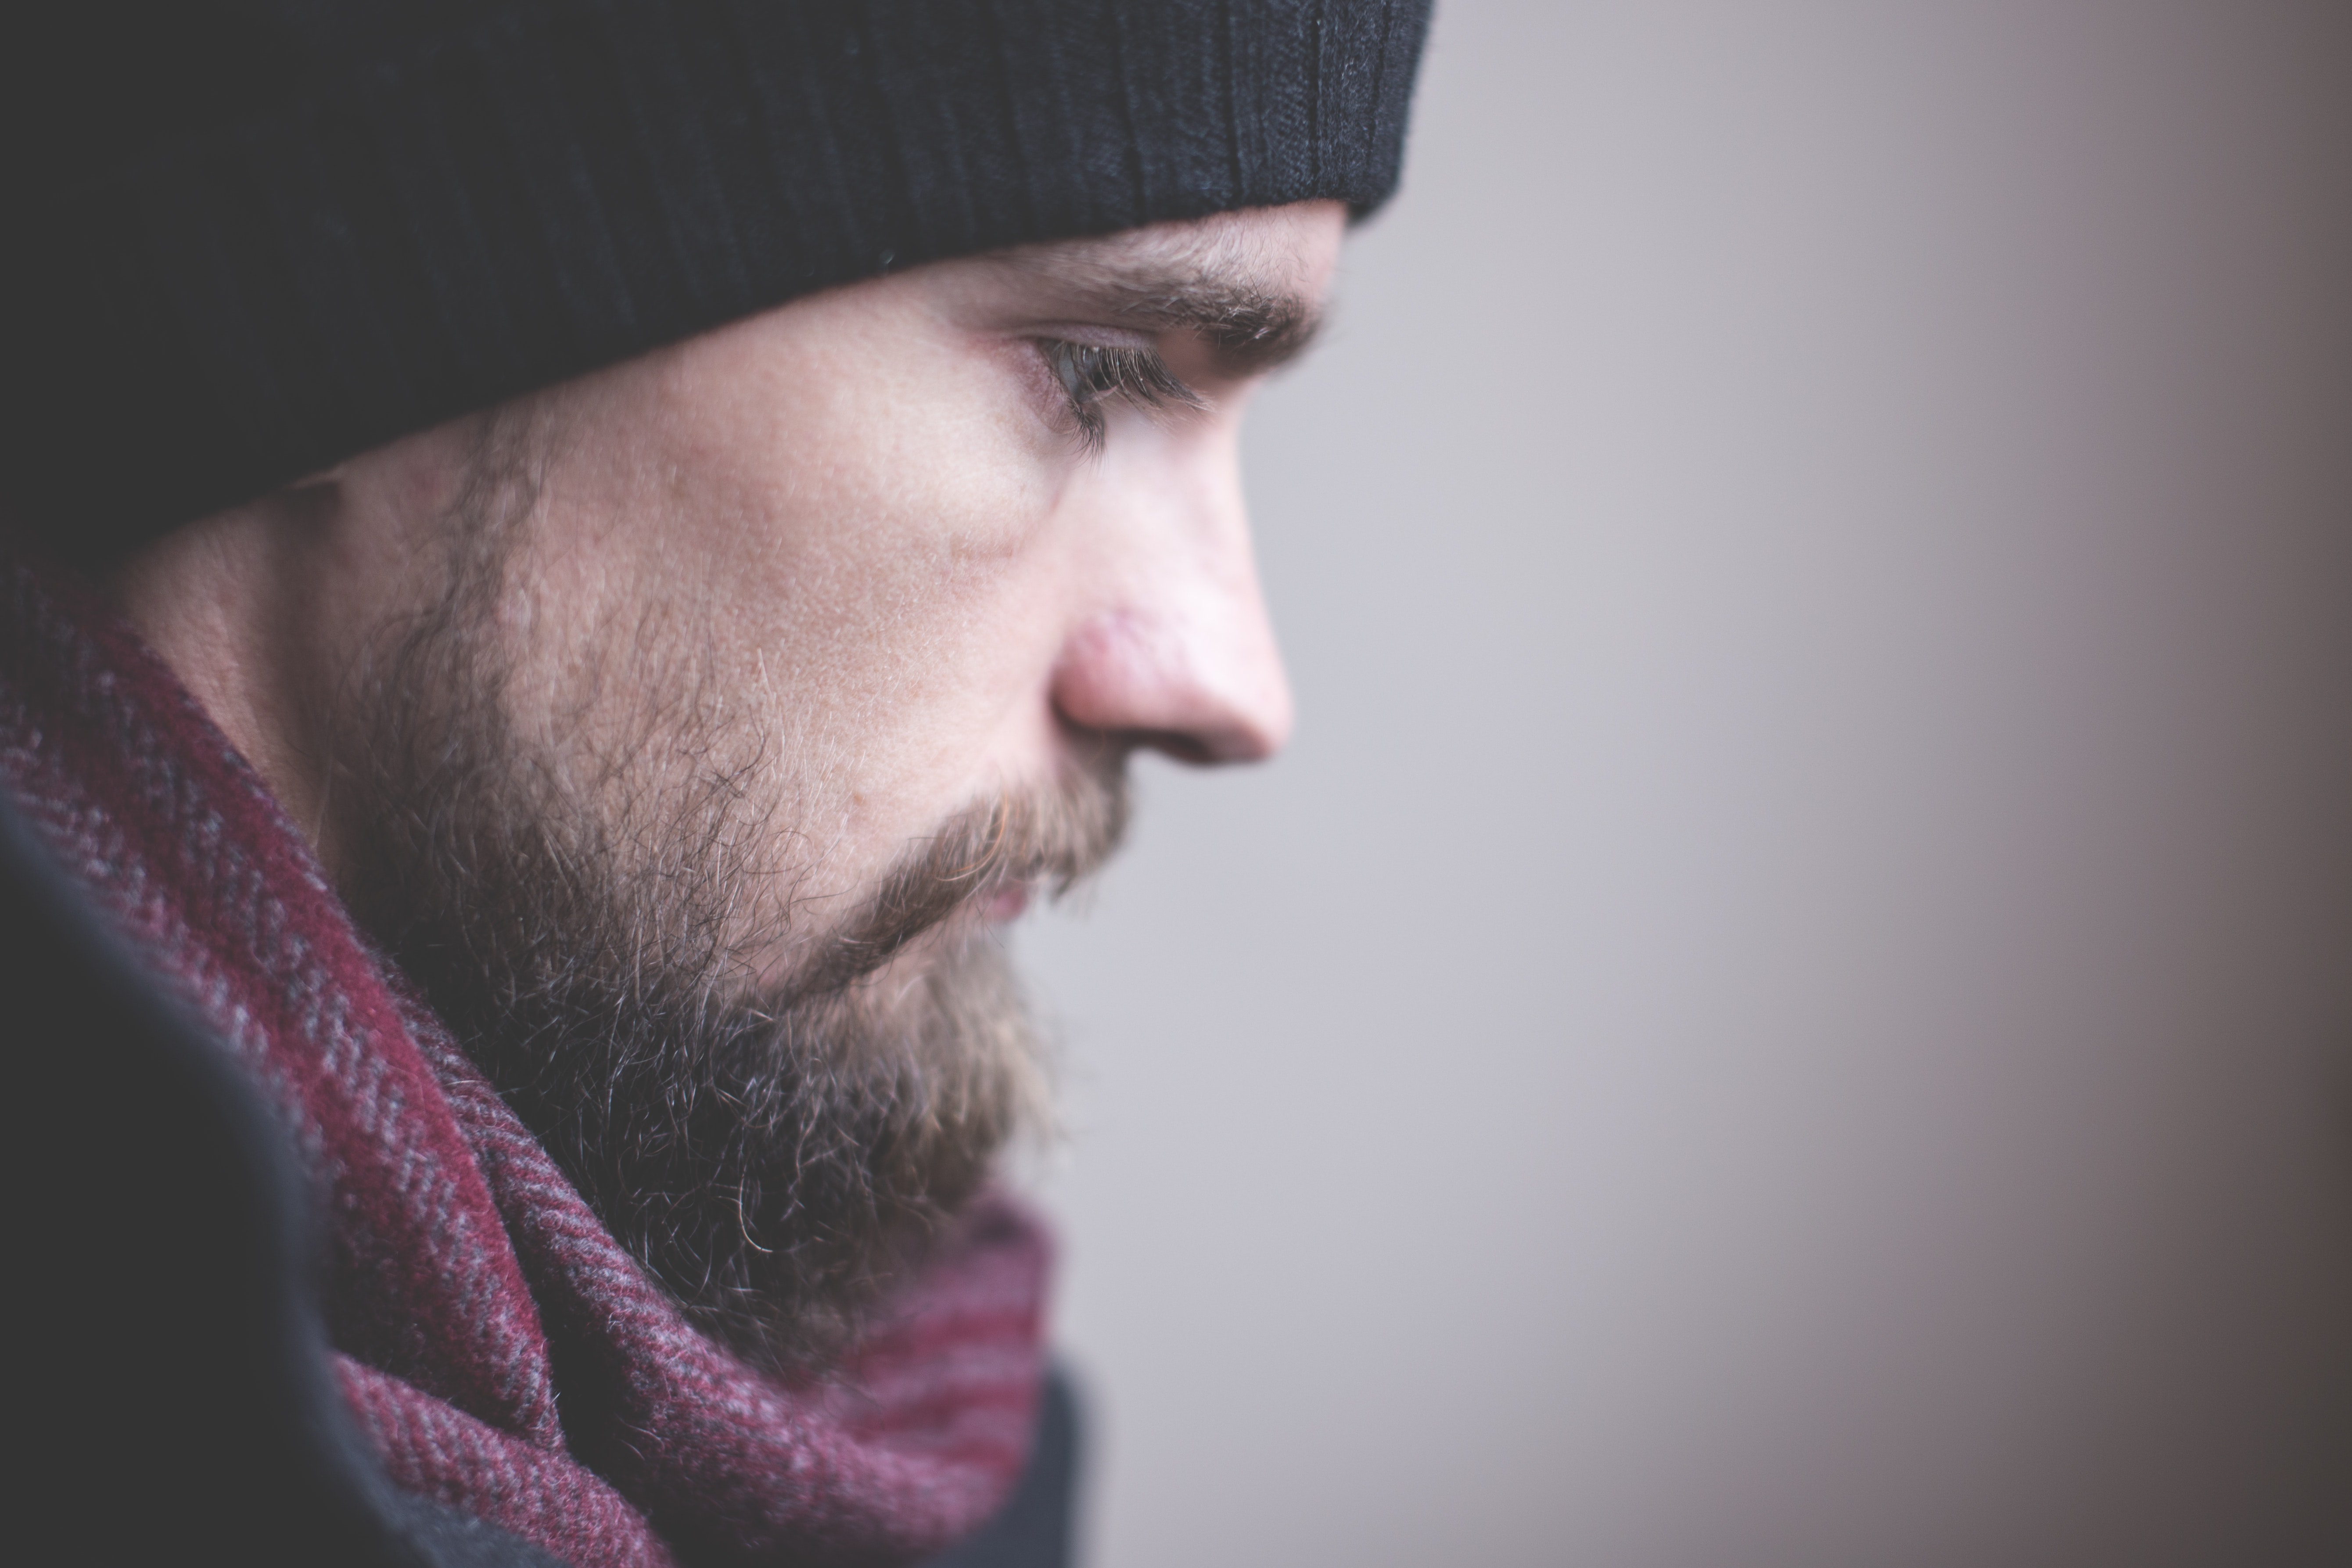 Man in Red Scarf and Black Nit Hat, Adult, Beard, Face, Facial hair, HQ Photo